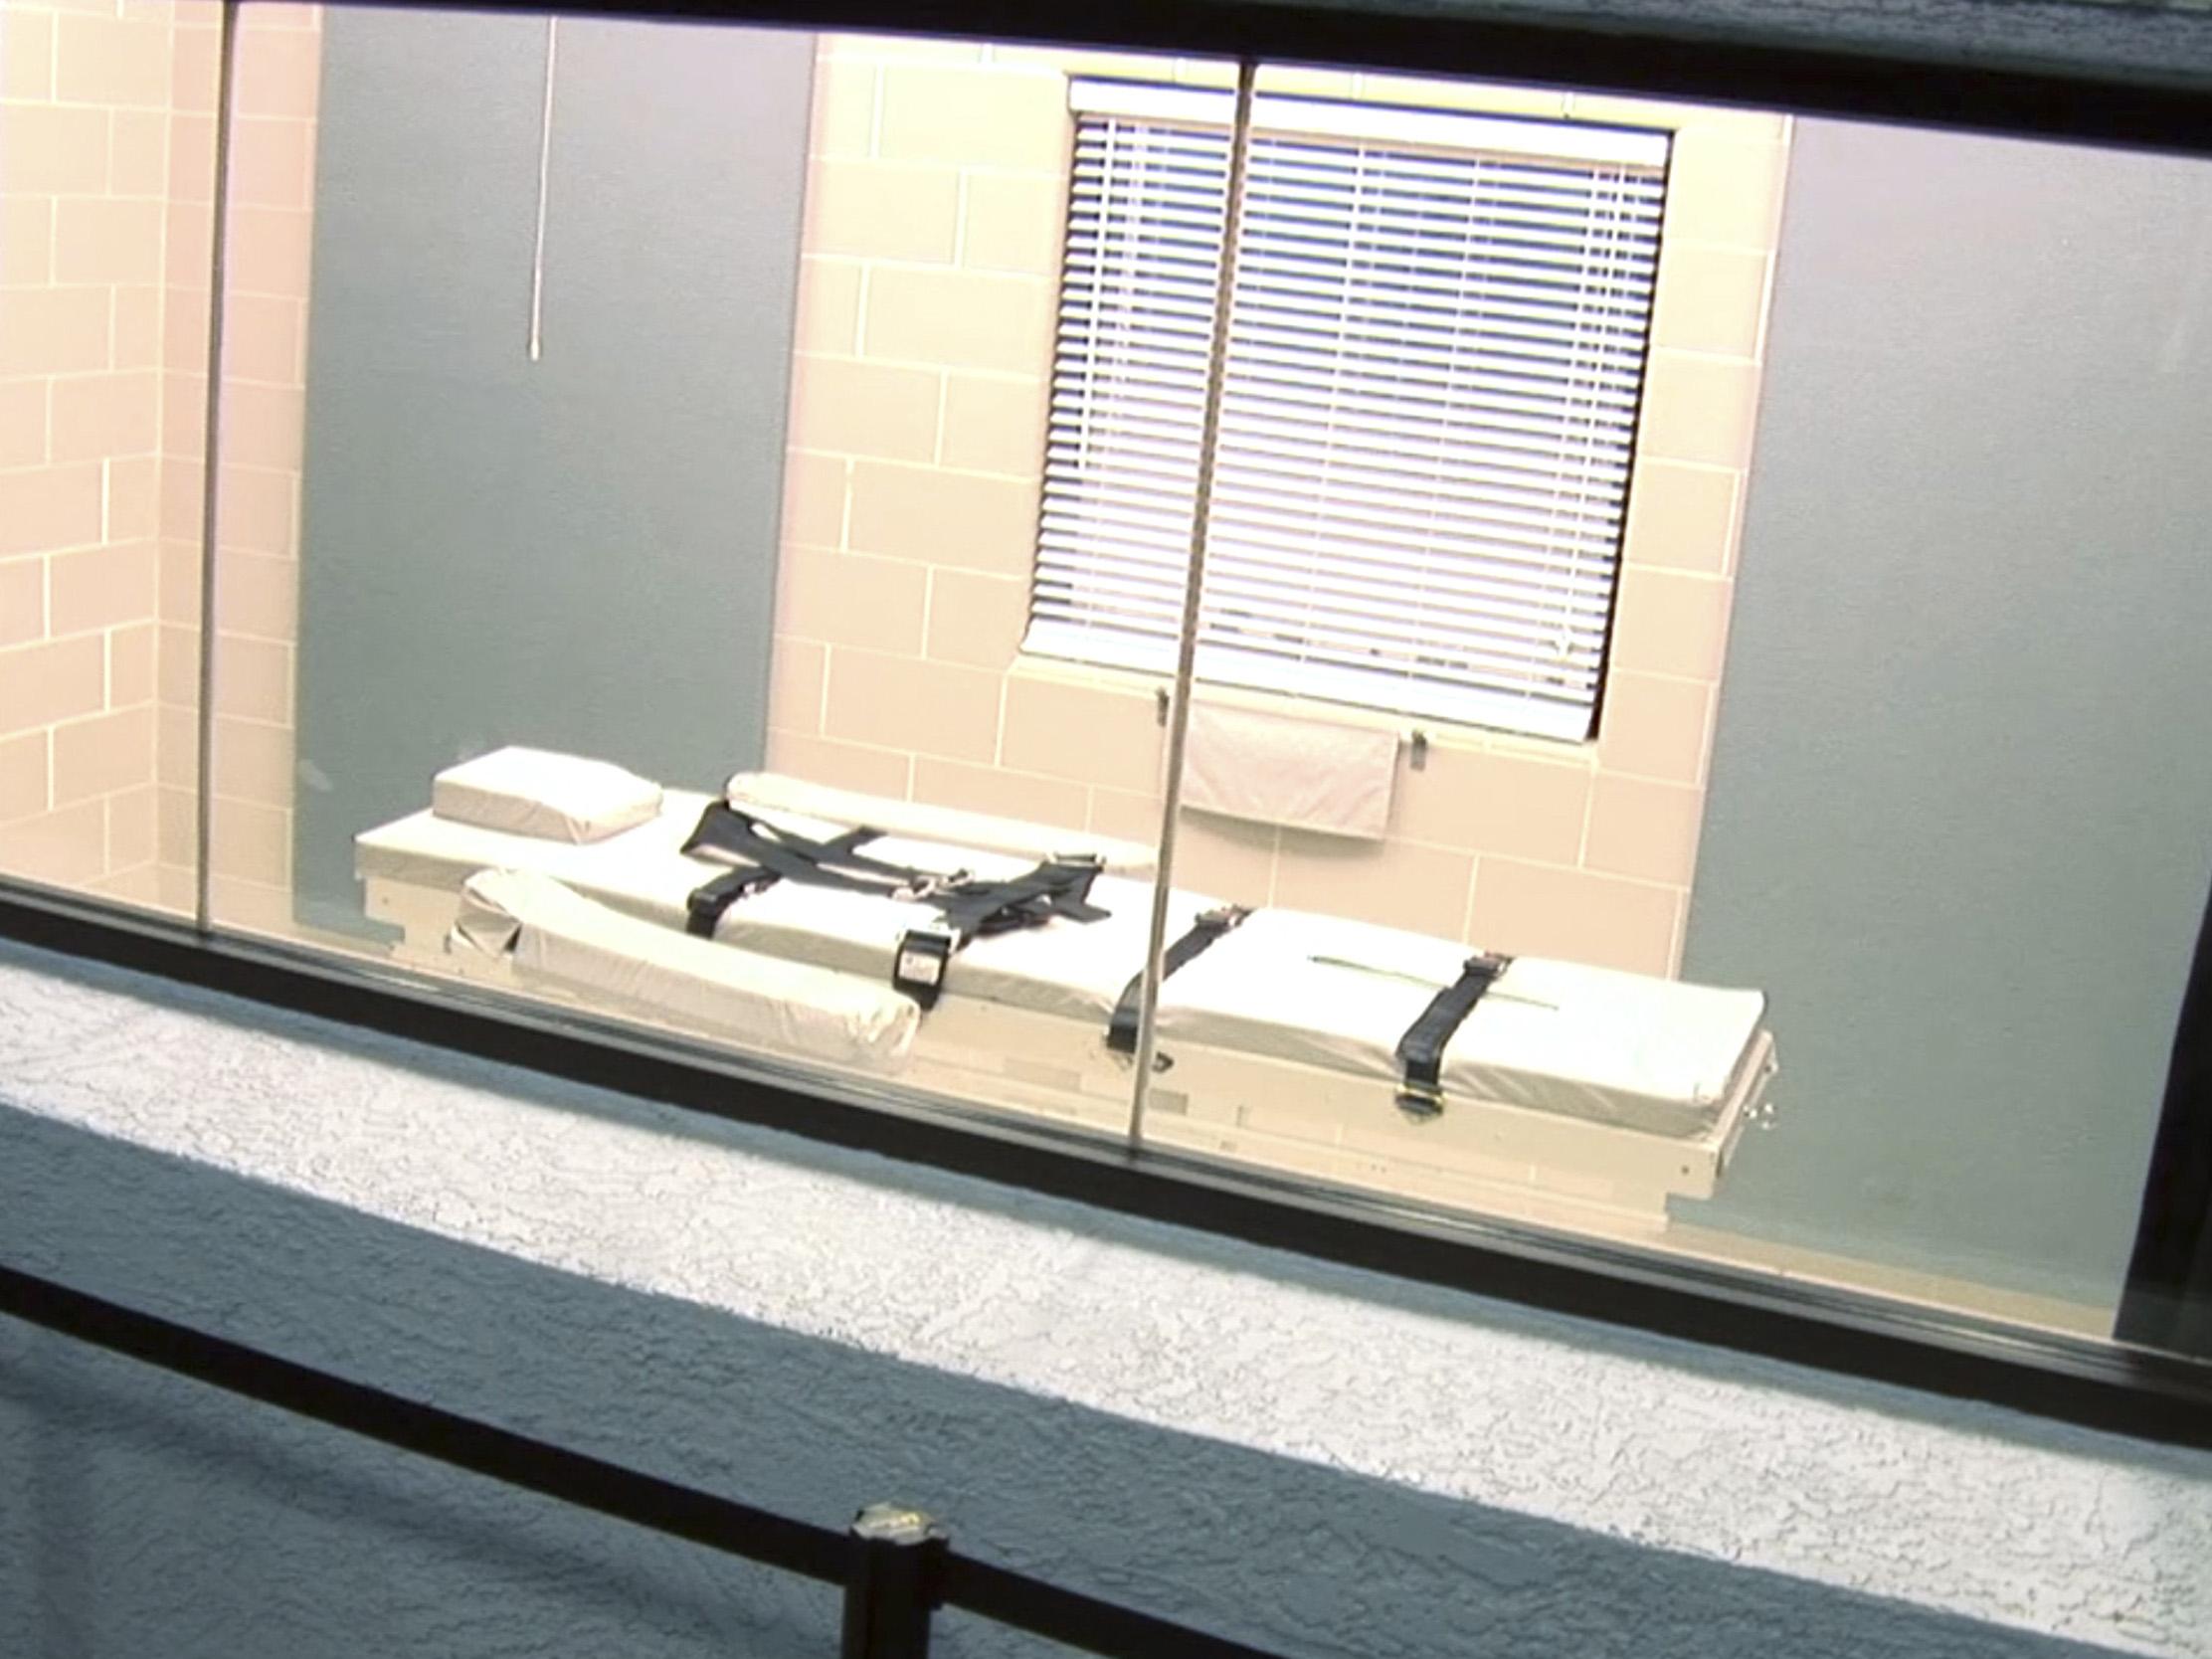 The state House is poised to vote on the bill resuming capital punishment